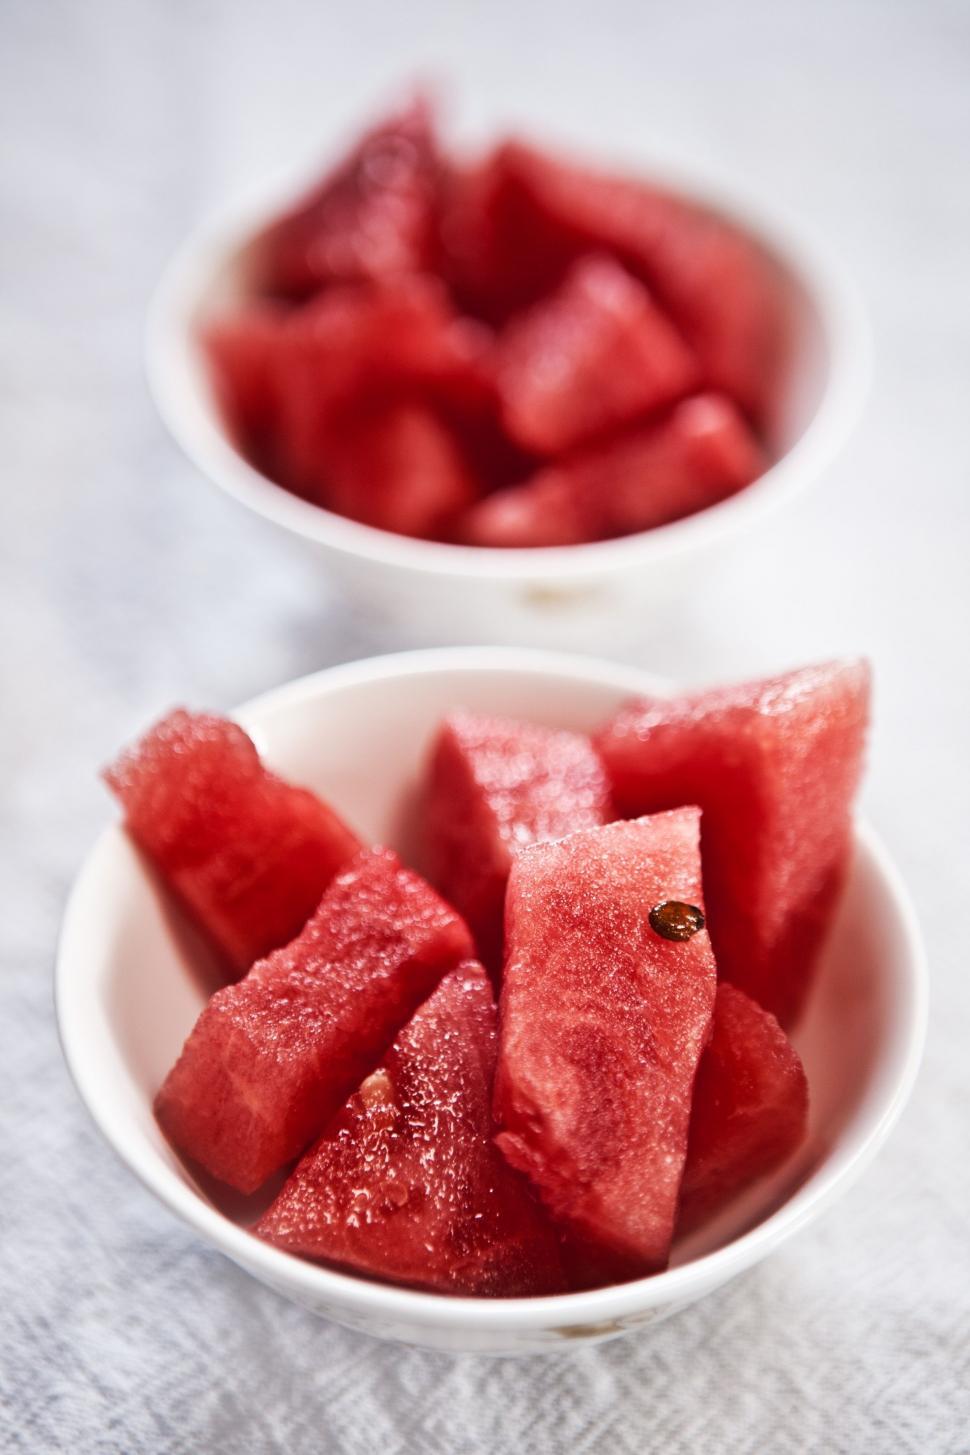 Free Image of Bowl of Watermelon Slices on Table 